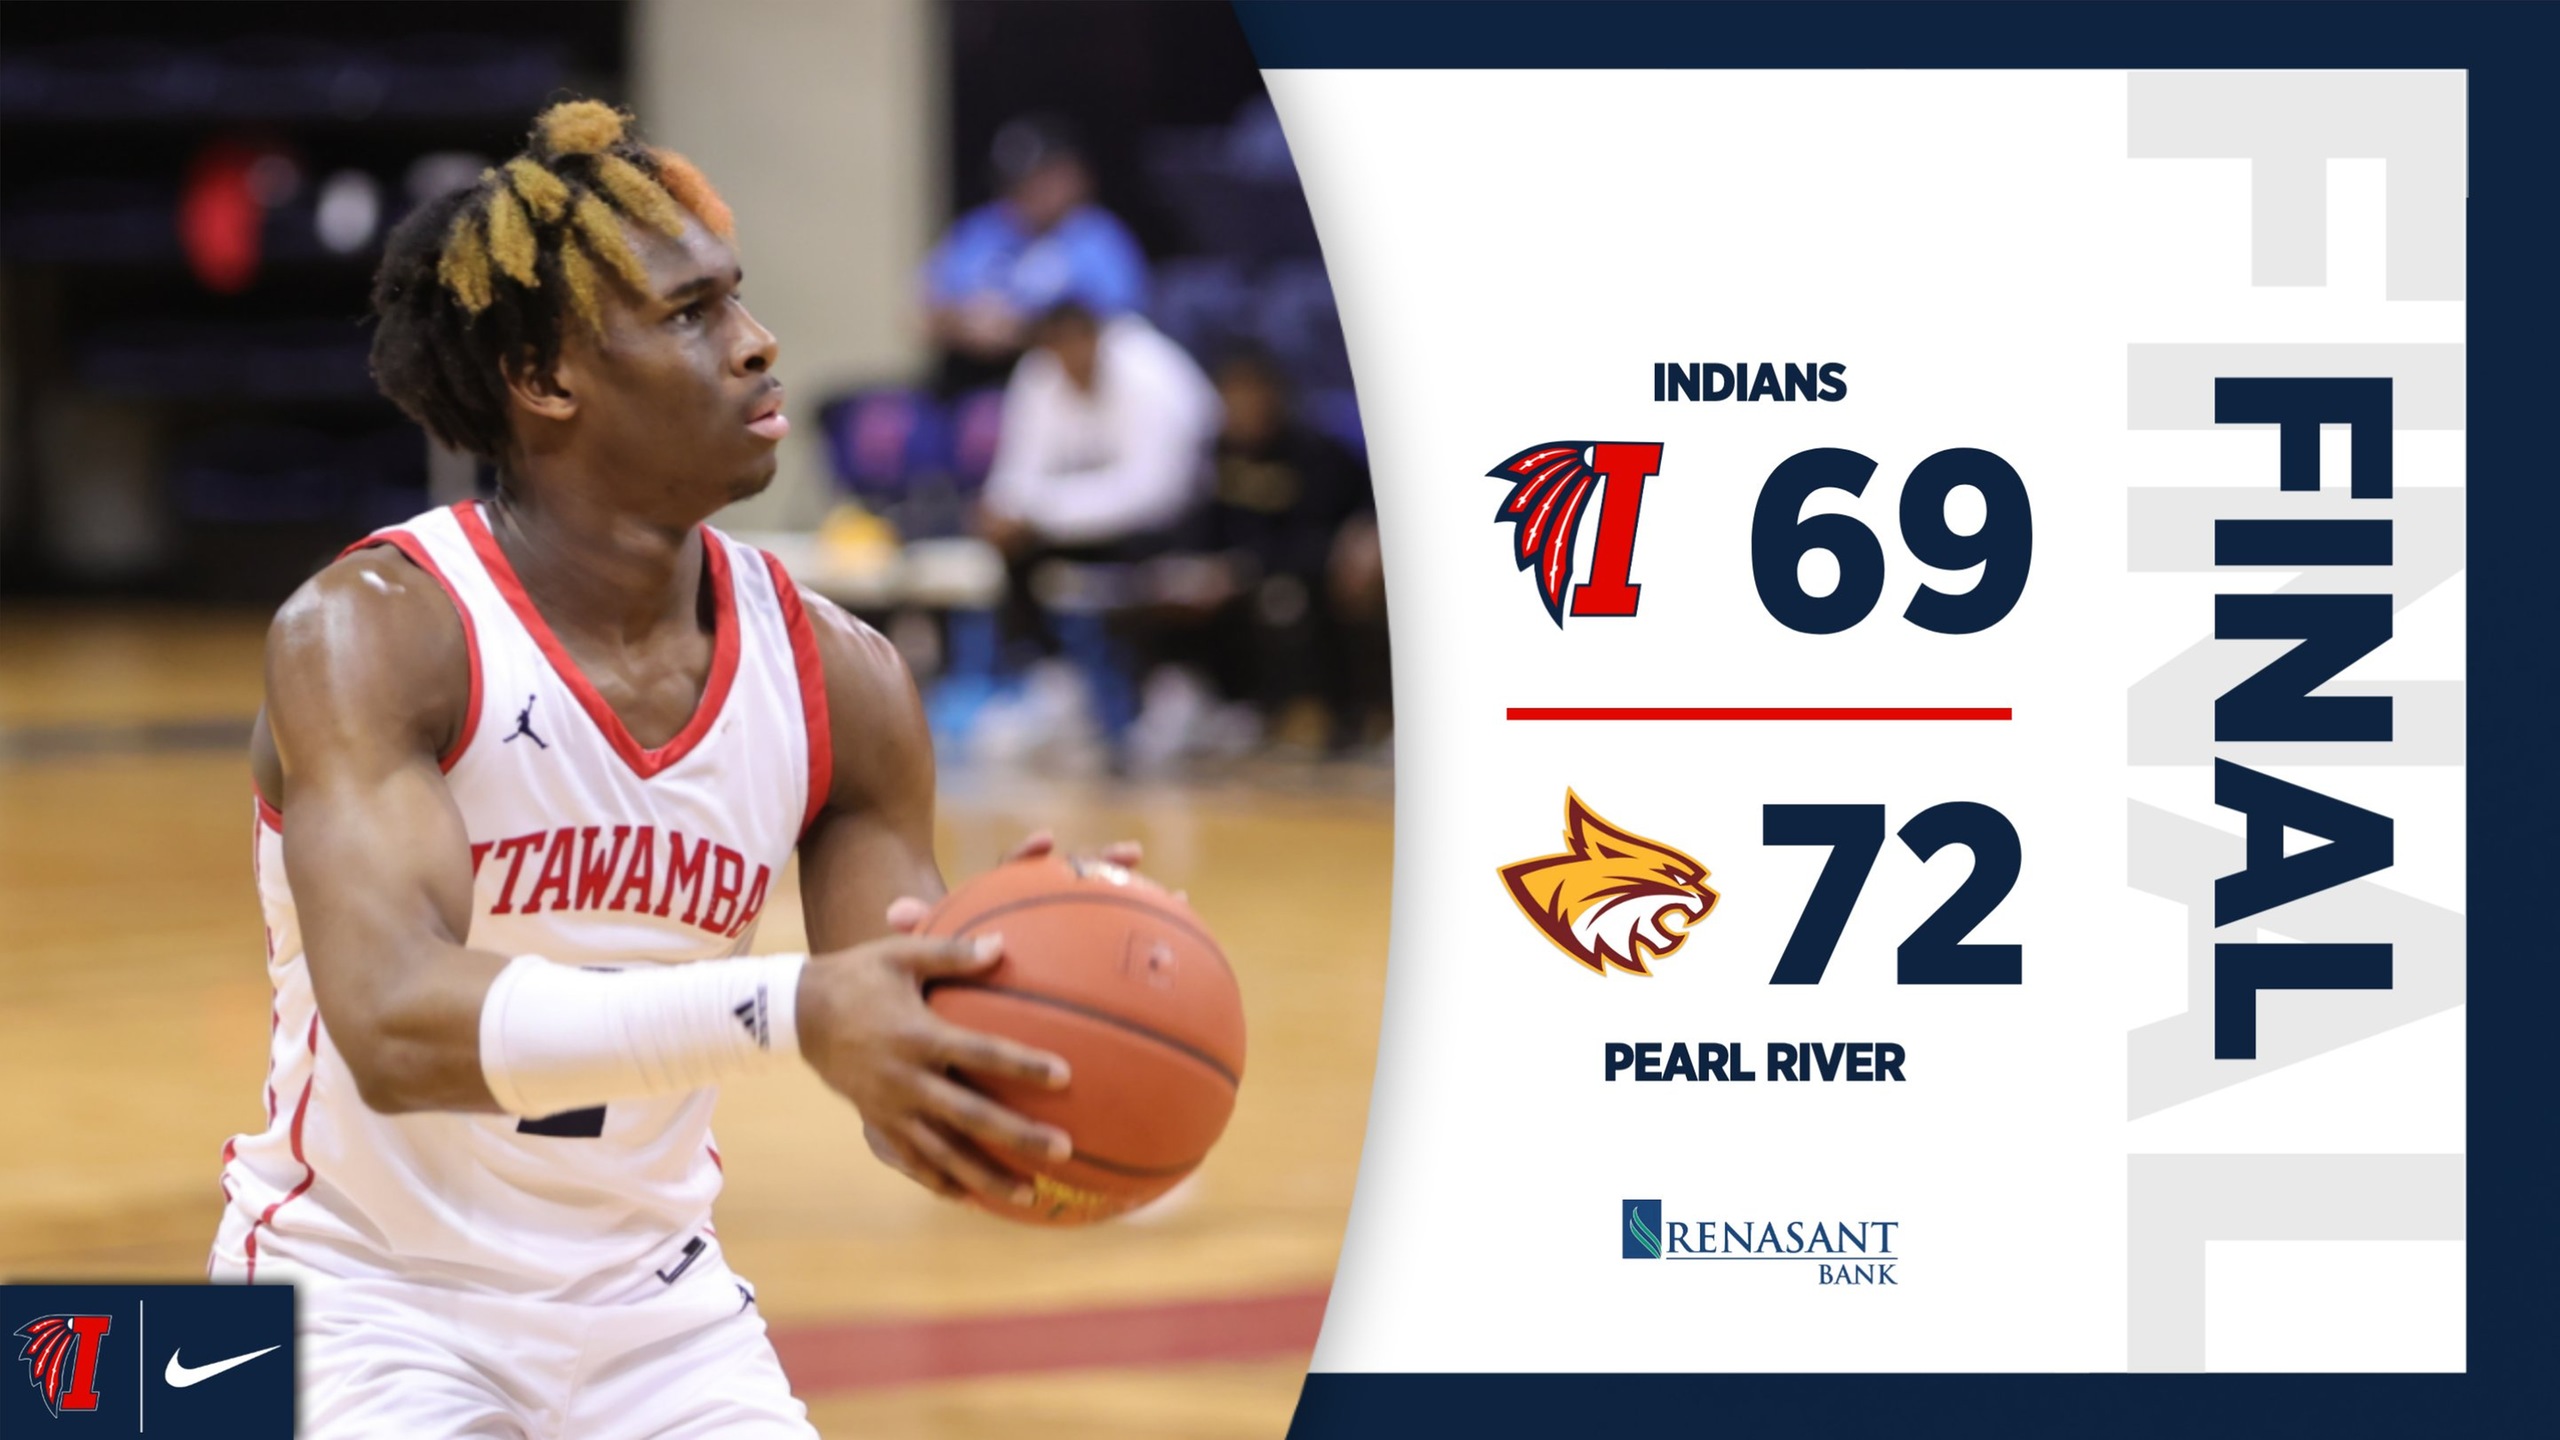 Indians struggle in loss to Pearl River